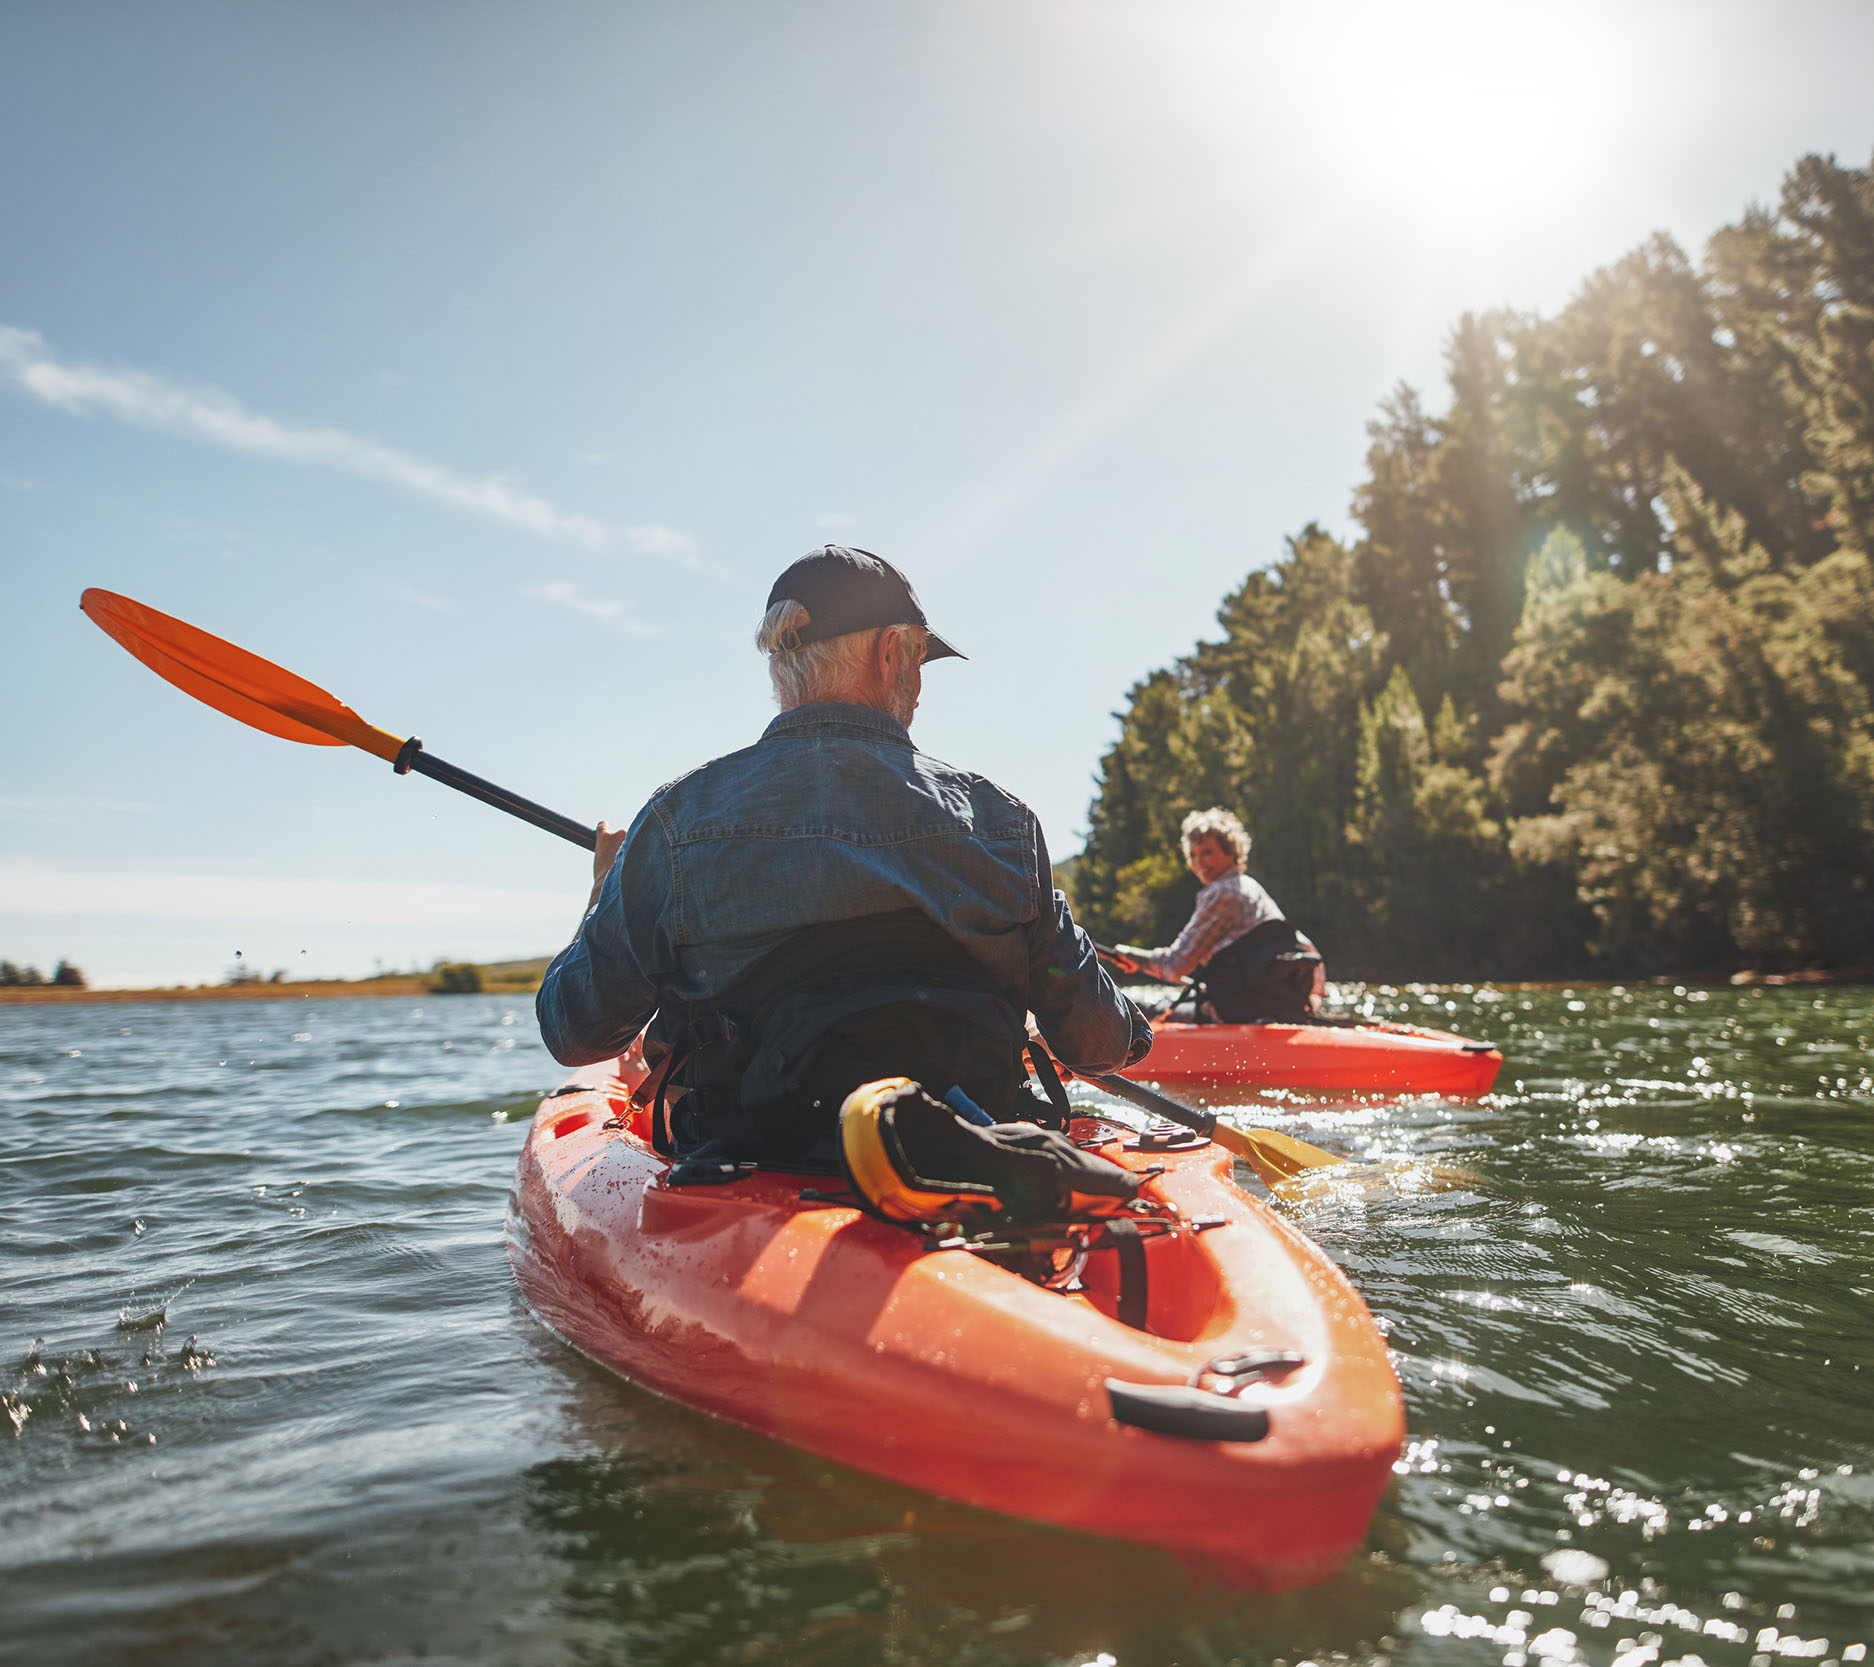 Sheaff Brock in the news, Dave Gilreath publications for Medical Economics, photo from behind of a man in a kayak on a sunny day with a woman kayaking in front of him